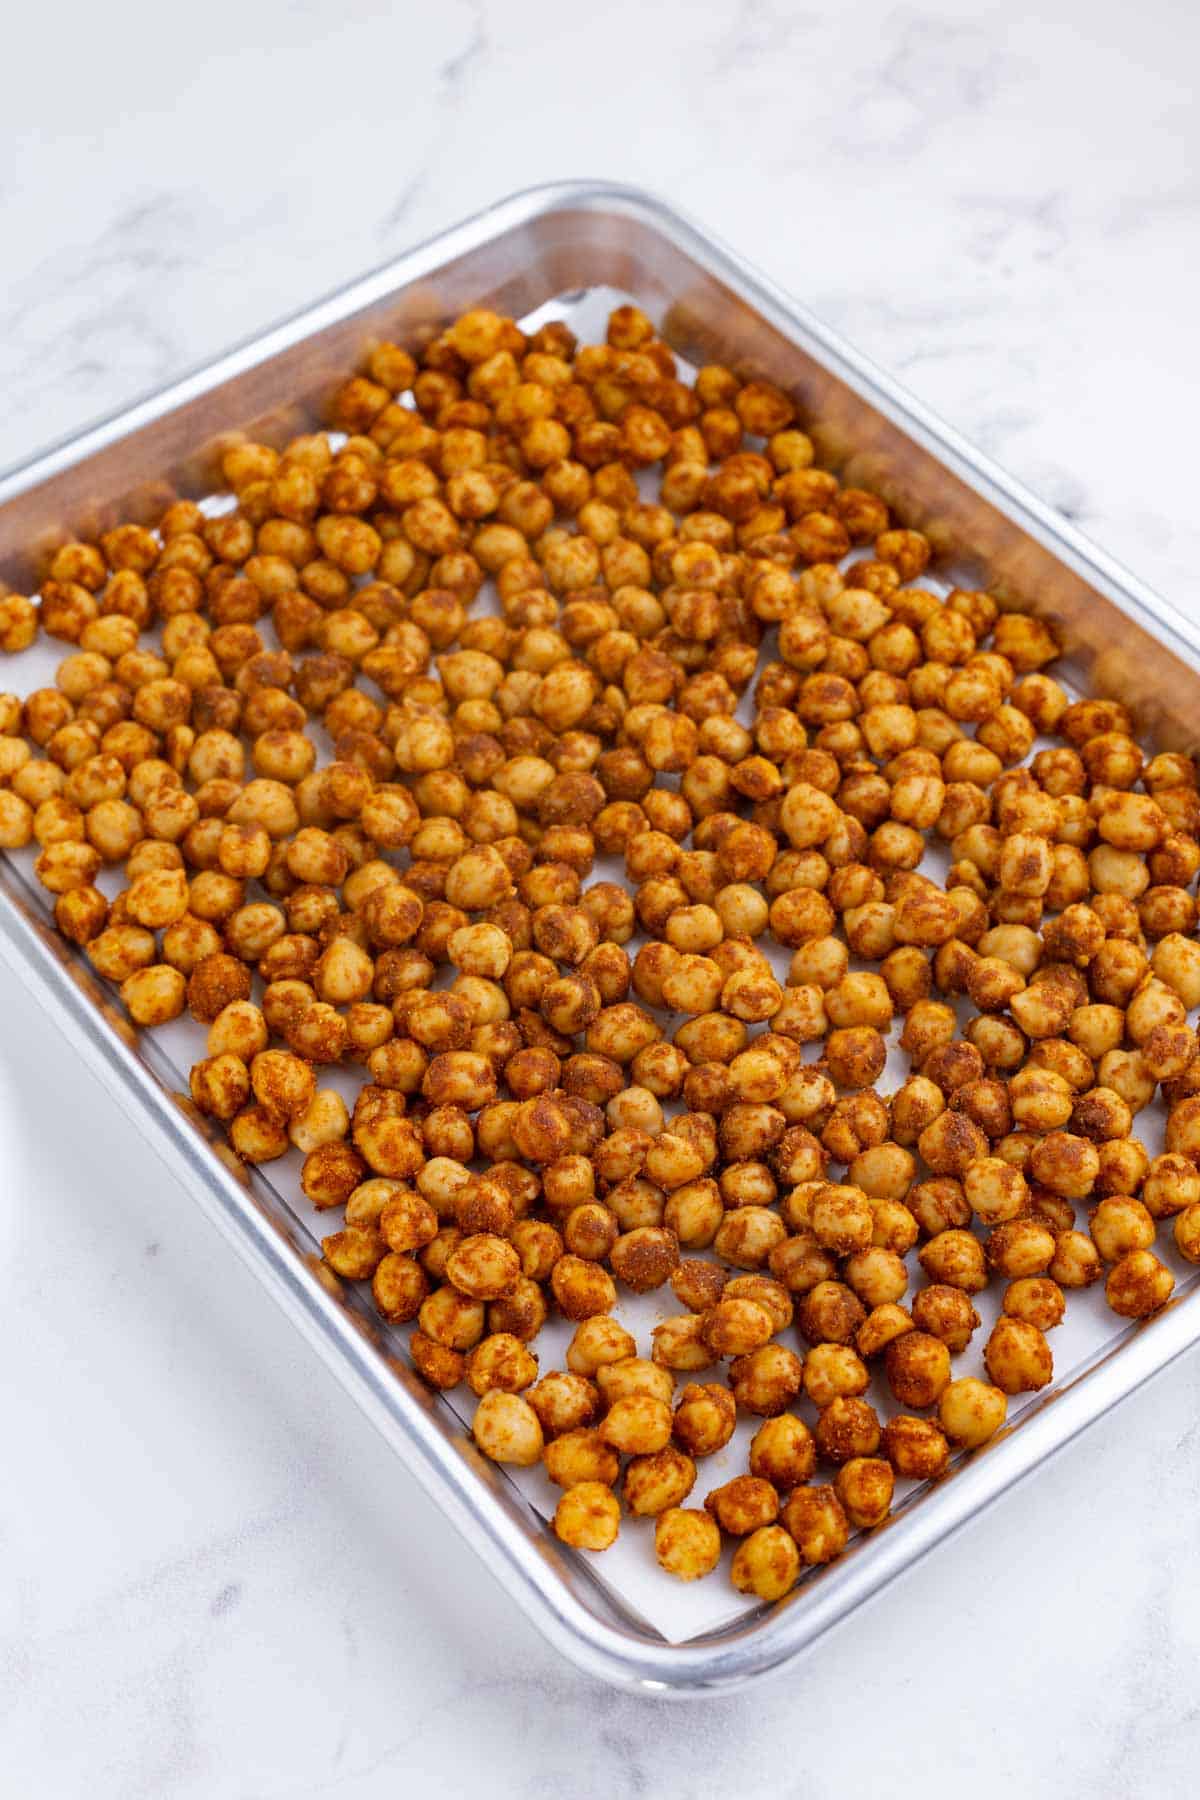 Chickpeas are spread on a pan.